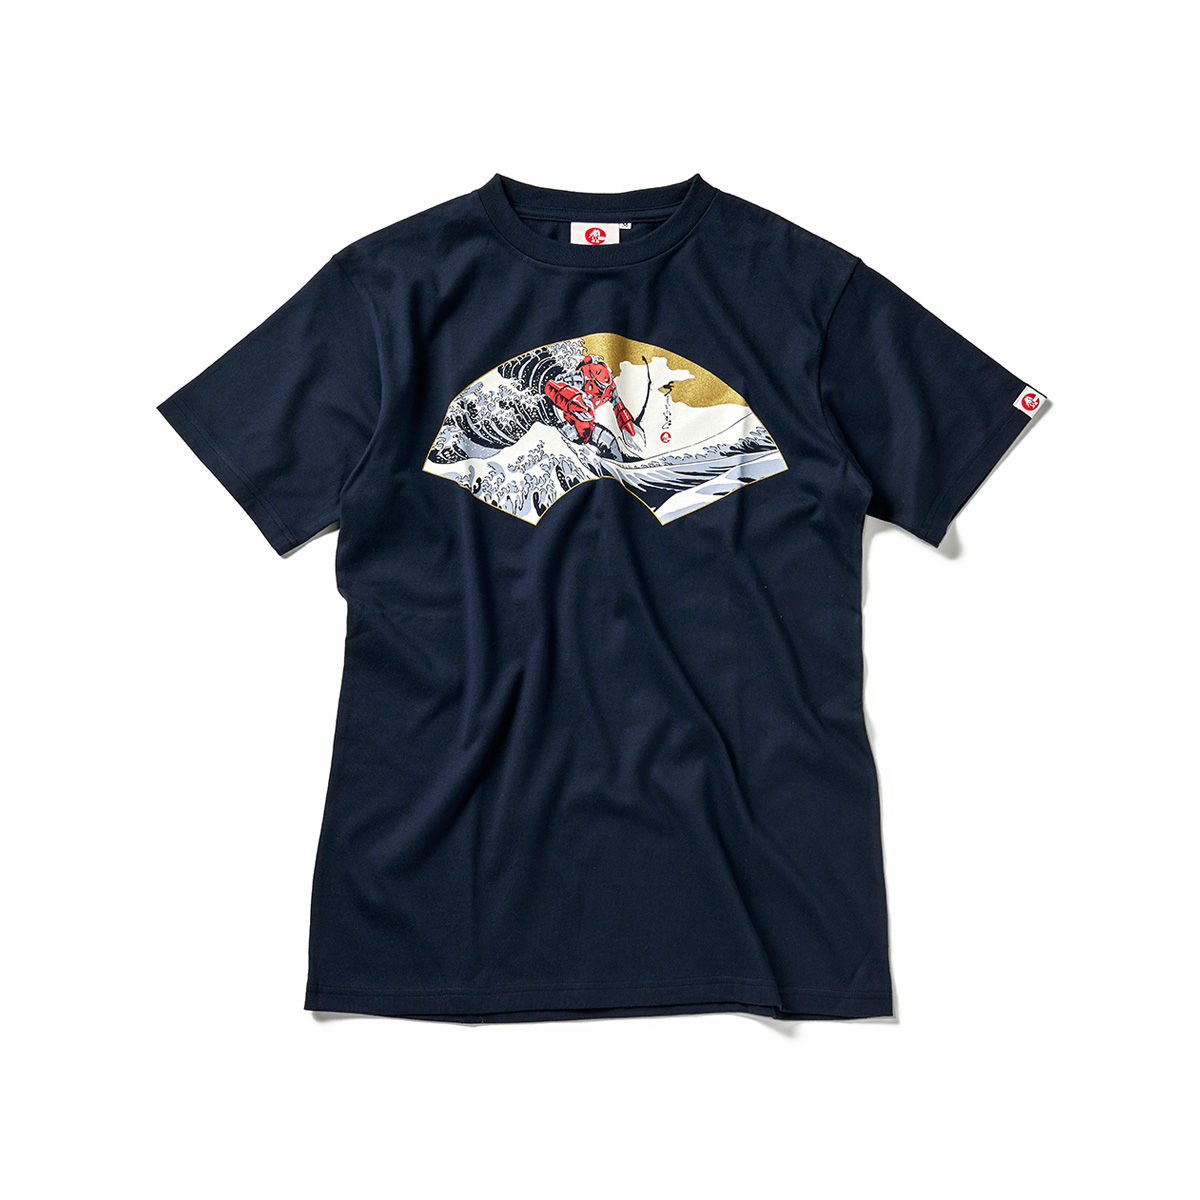 Z'Gok and the Great Wave T-shirt—Mobile Suit Gundam/STRICT-G JAPAN Collaboration